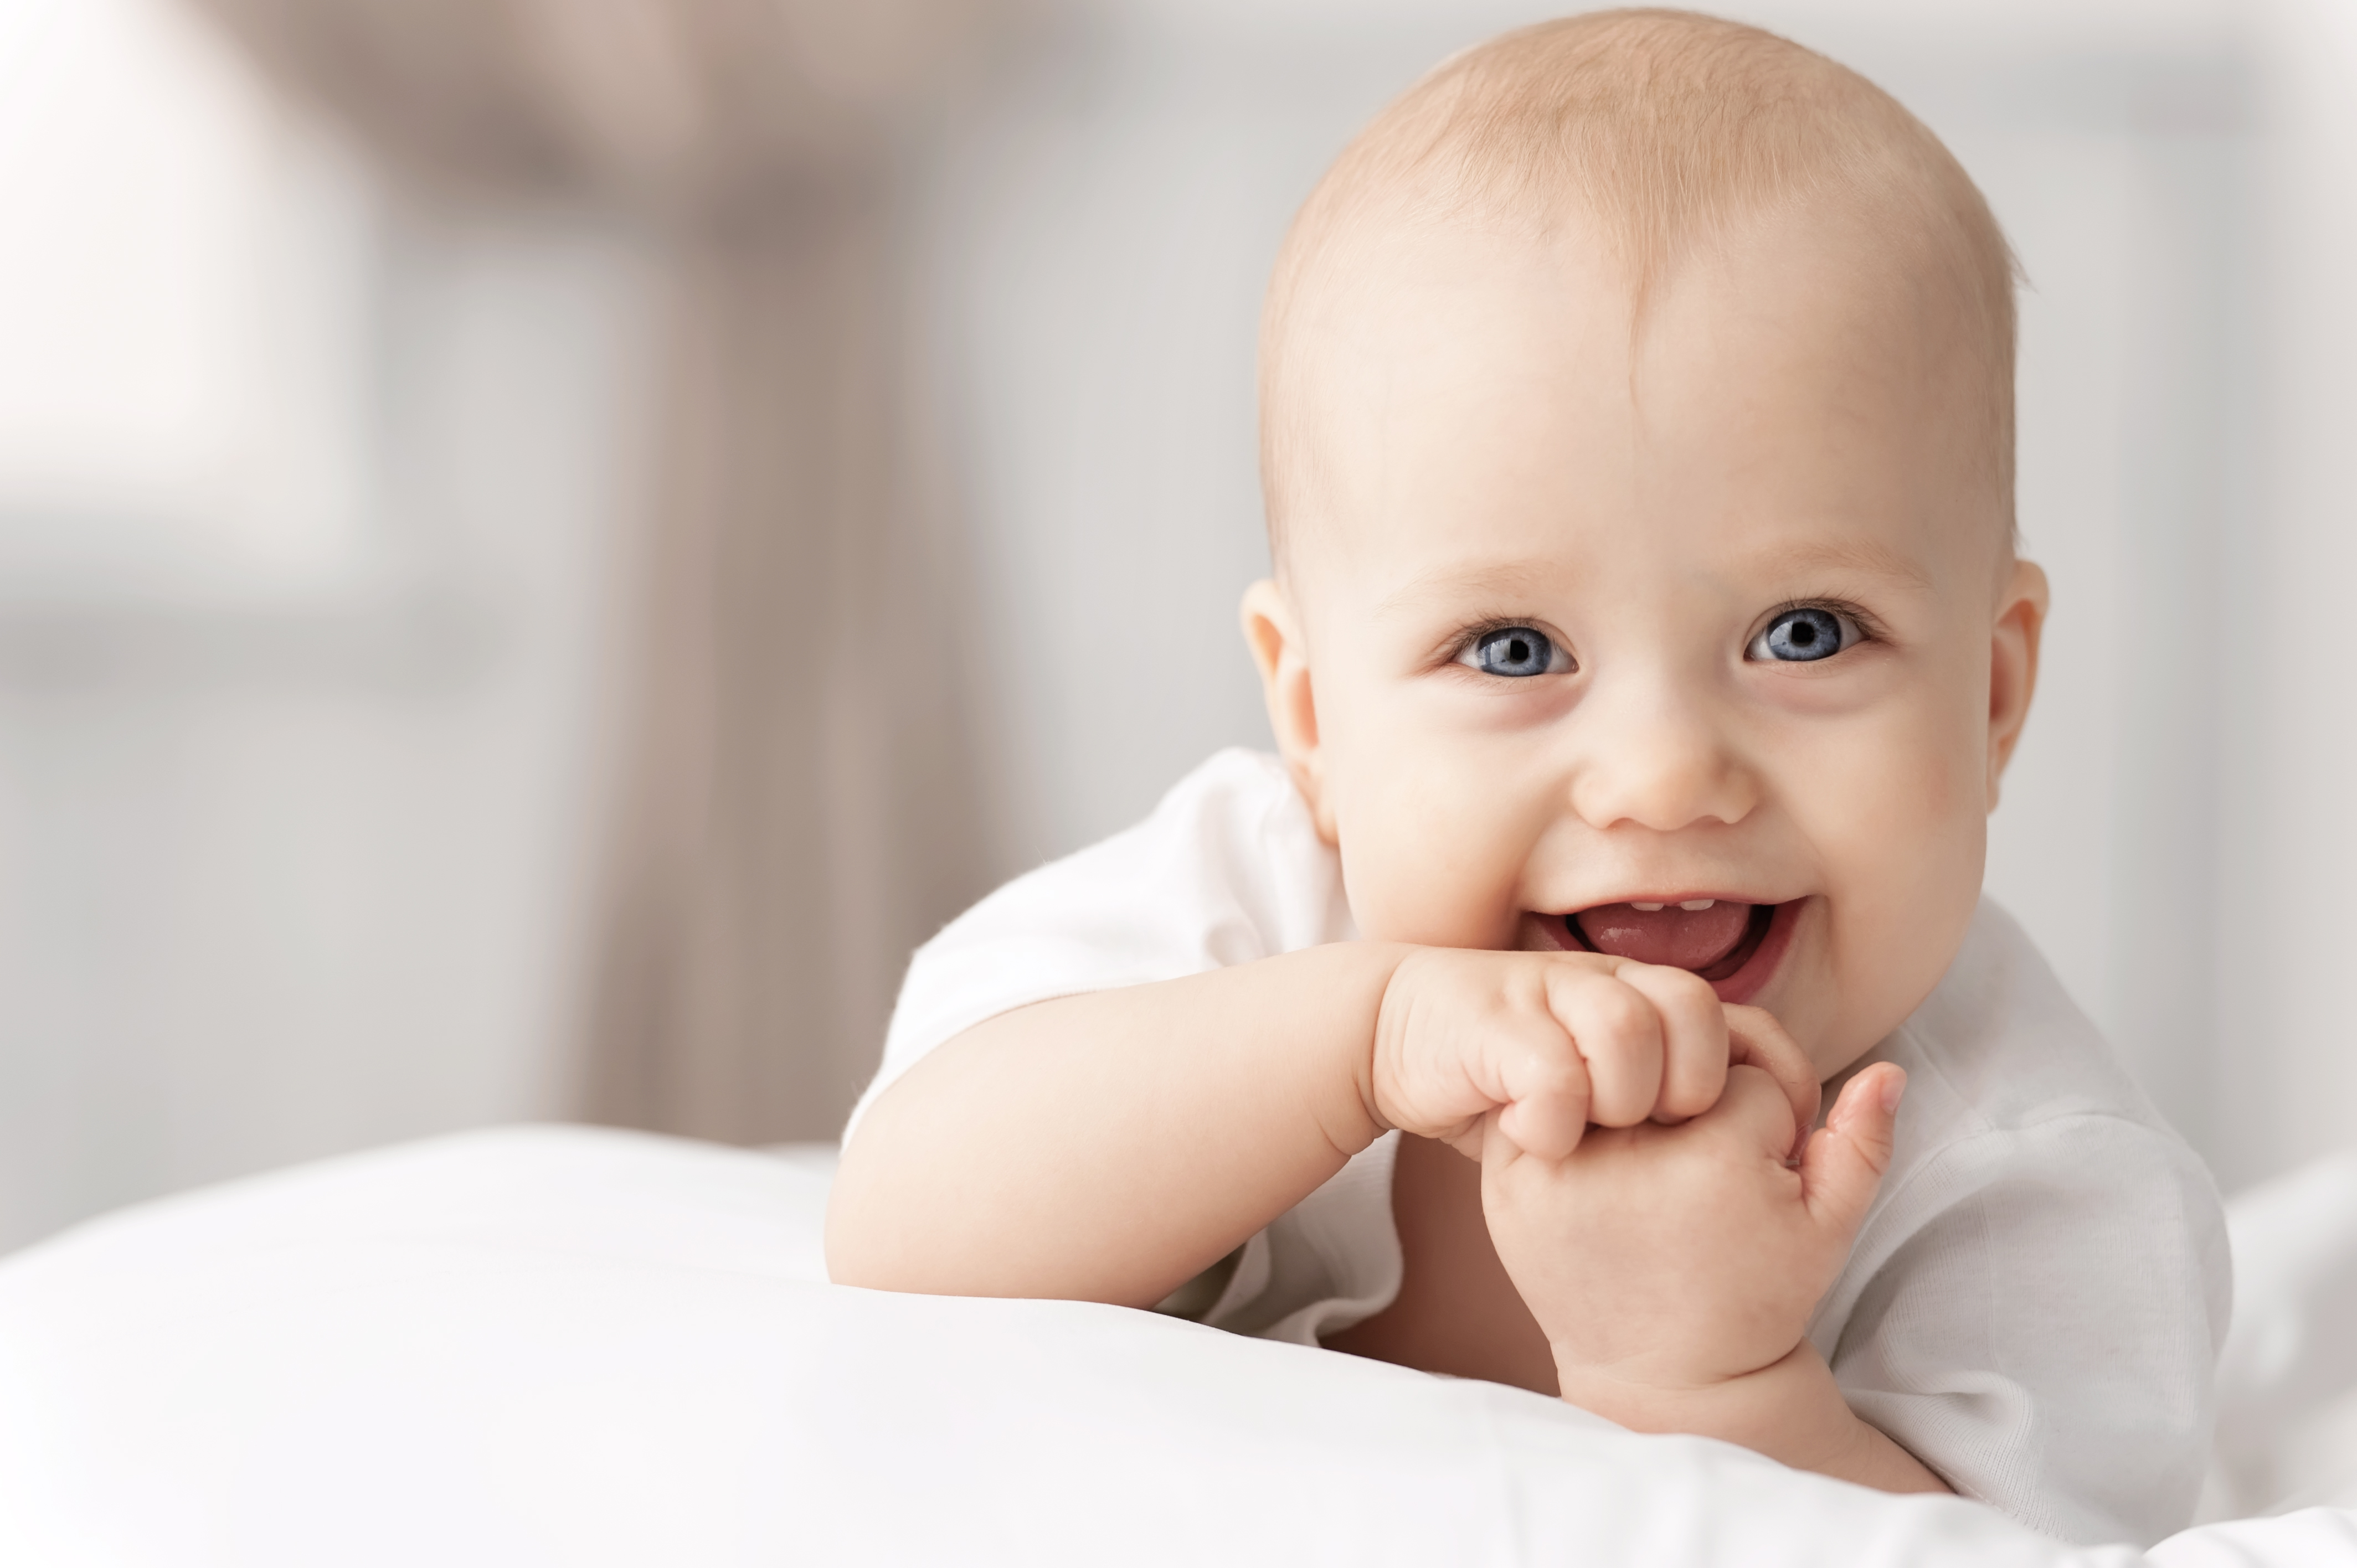 Why Babies Are So Cute - And Why We React the Way We Do.